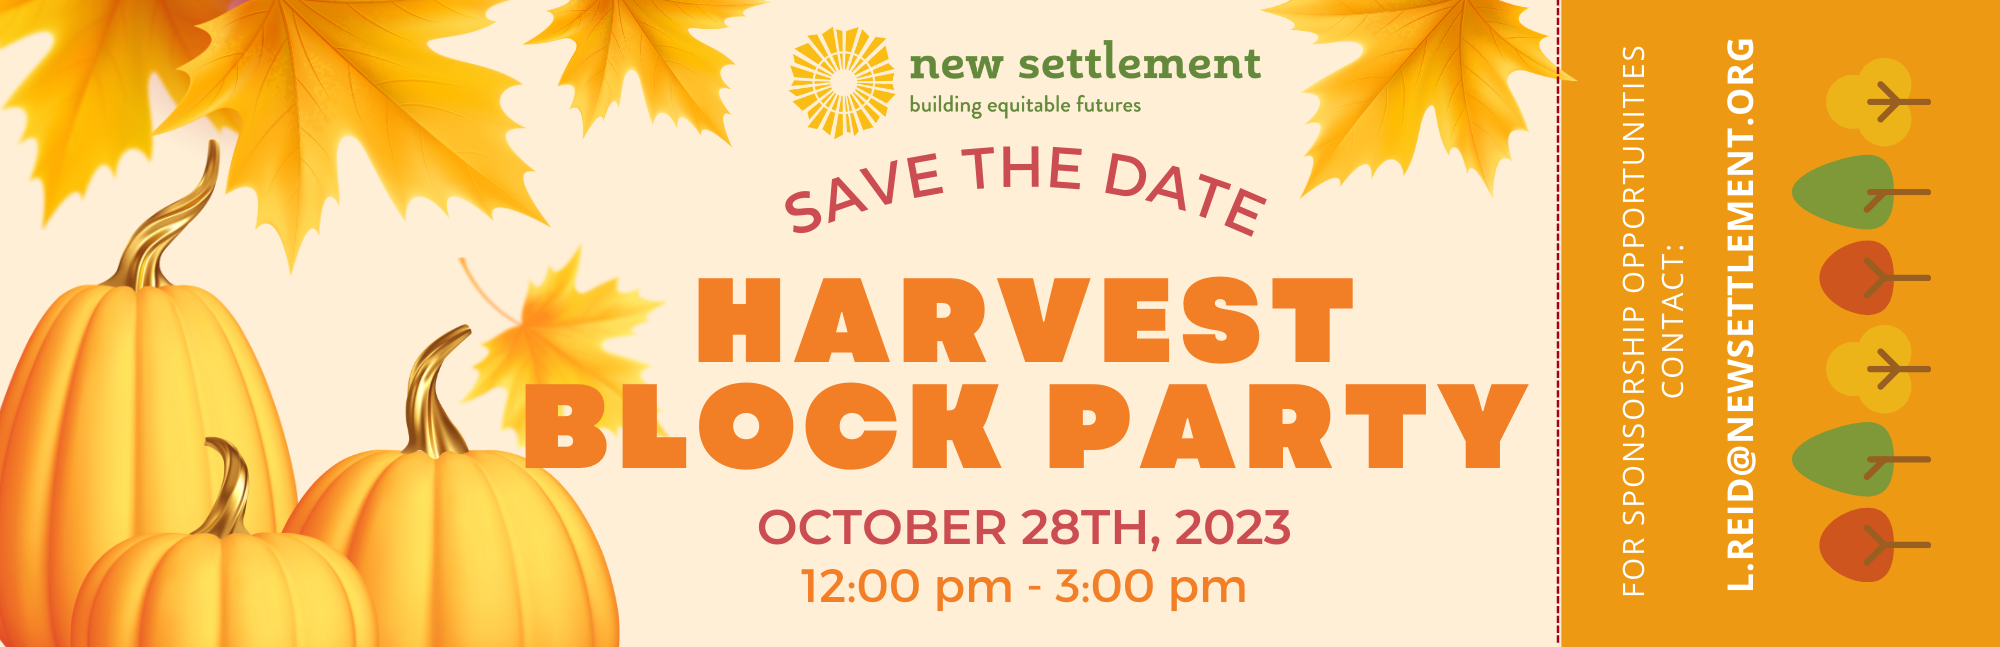 Save the date grpahic with pumpkins for New Settlement Harvest Block Party on 10/28/23 from 12-3pm